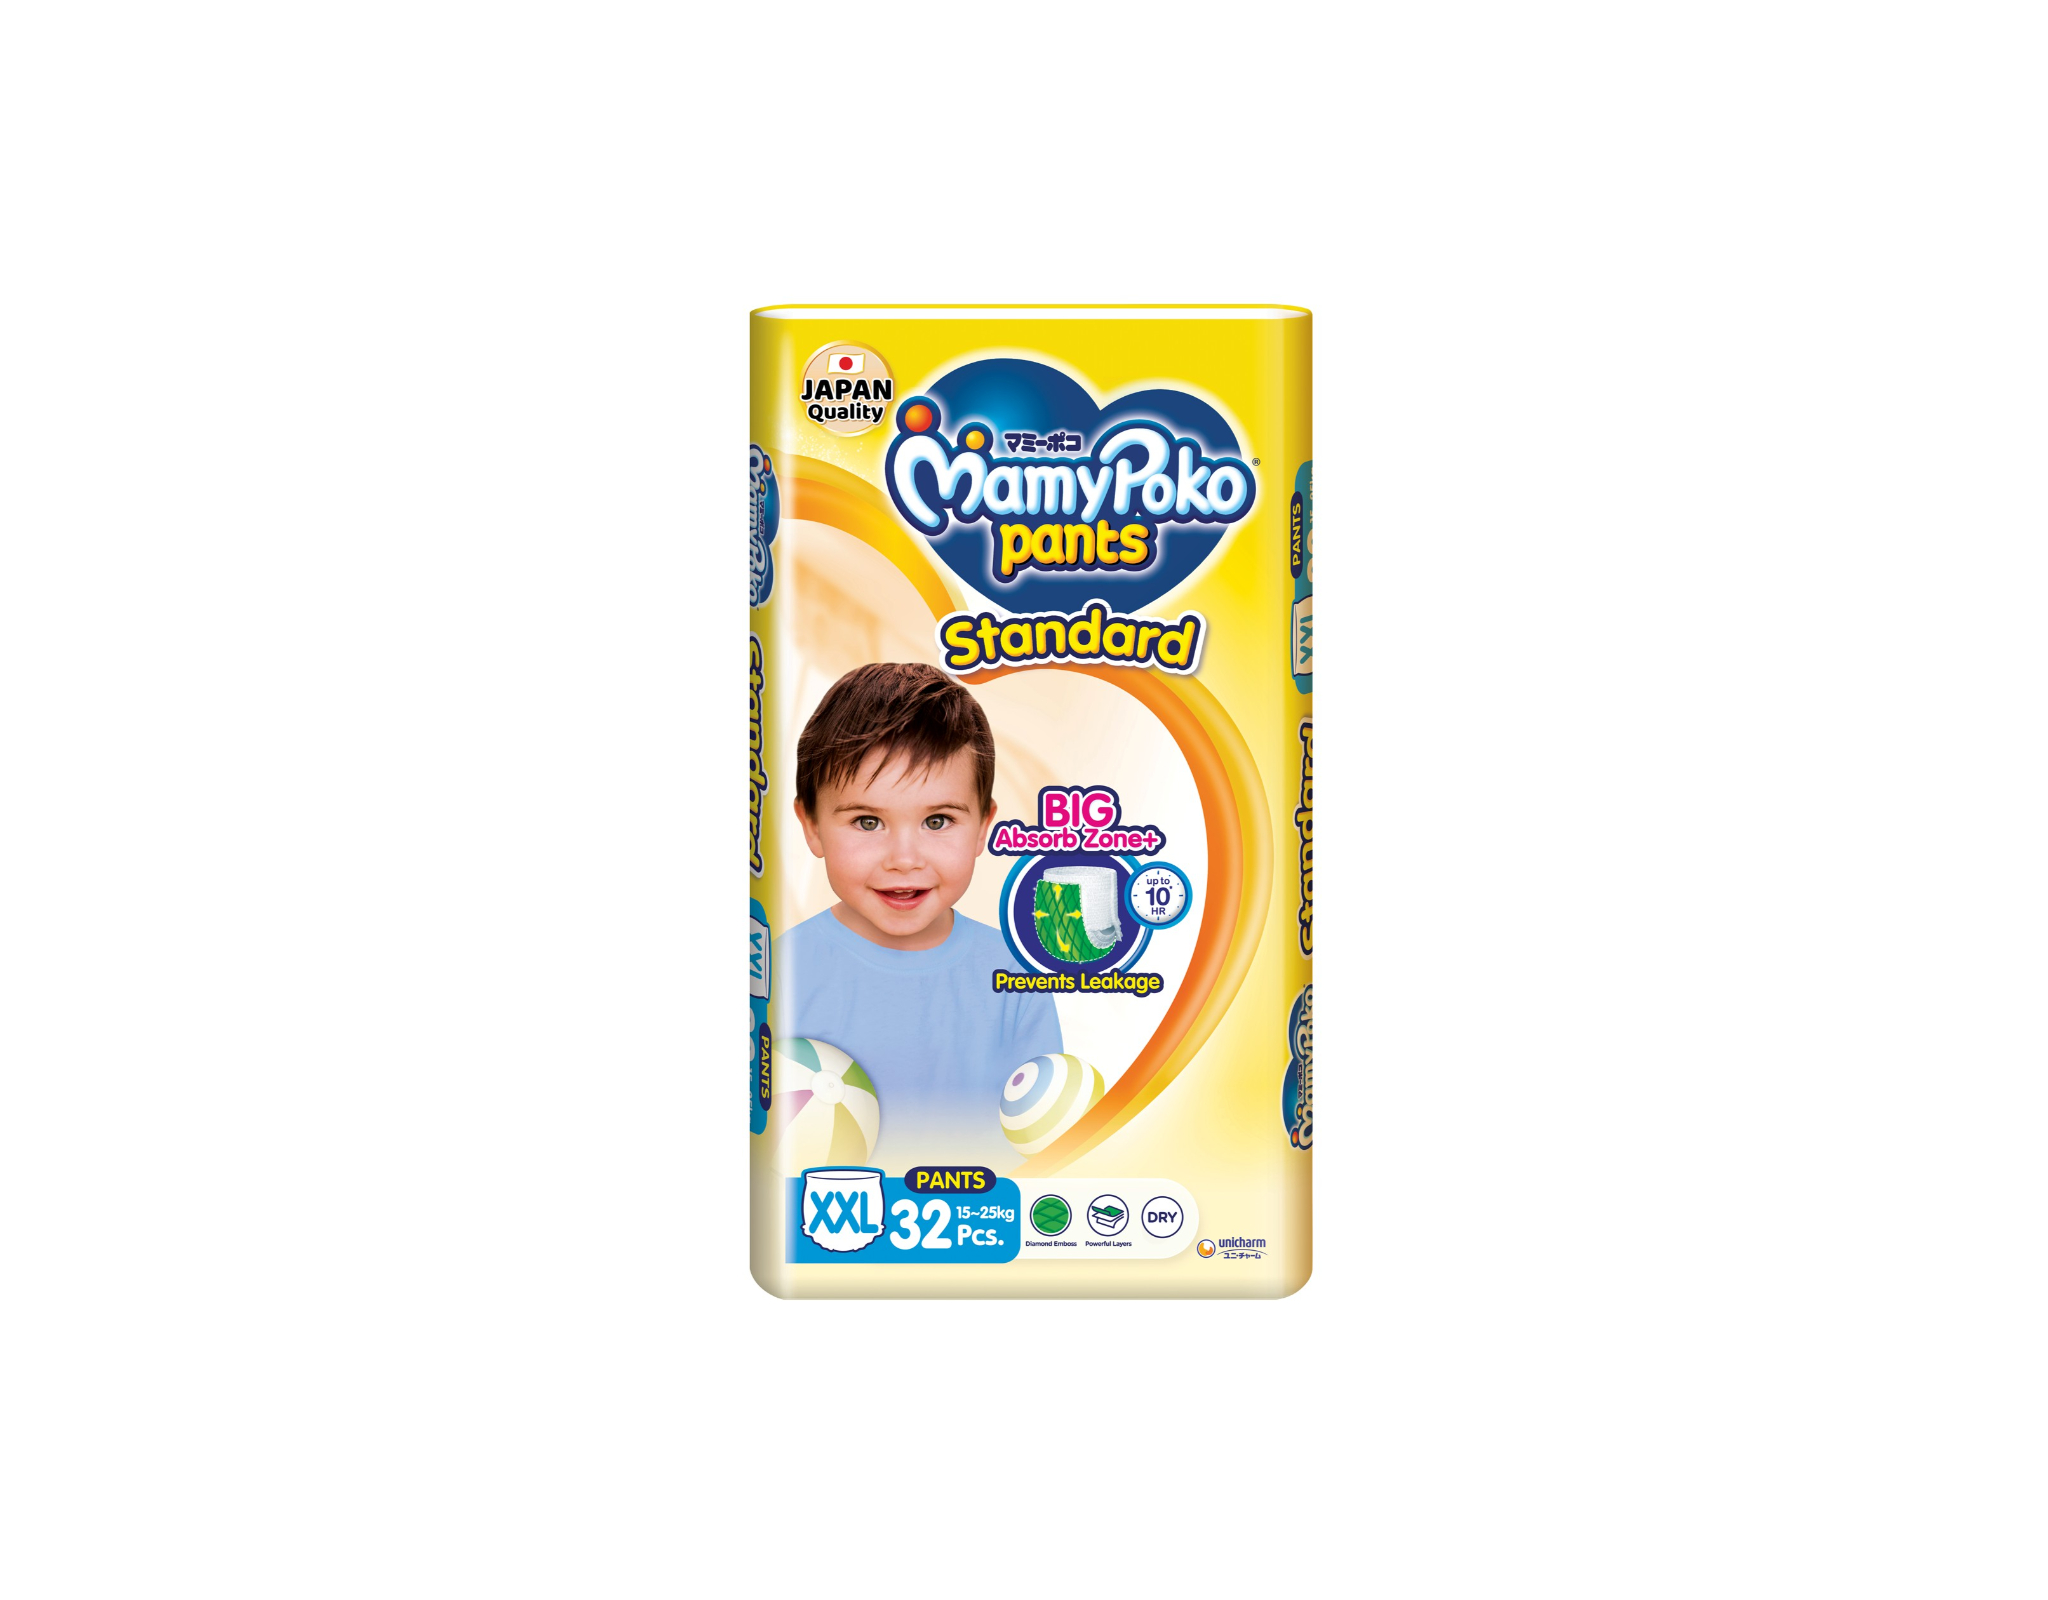 Buy Mamypoko Pants Standard Diaper - Large, 9-14 Kg 34 pcs Pouch Online at  Best Price. of Rs 399 - bigbasket